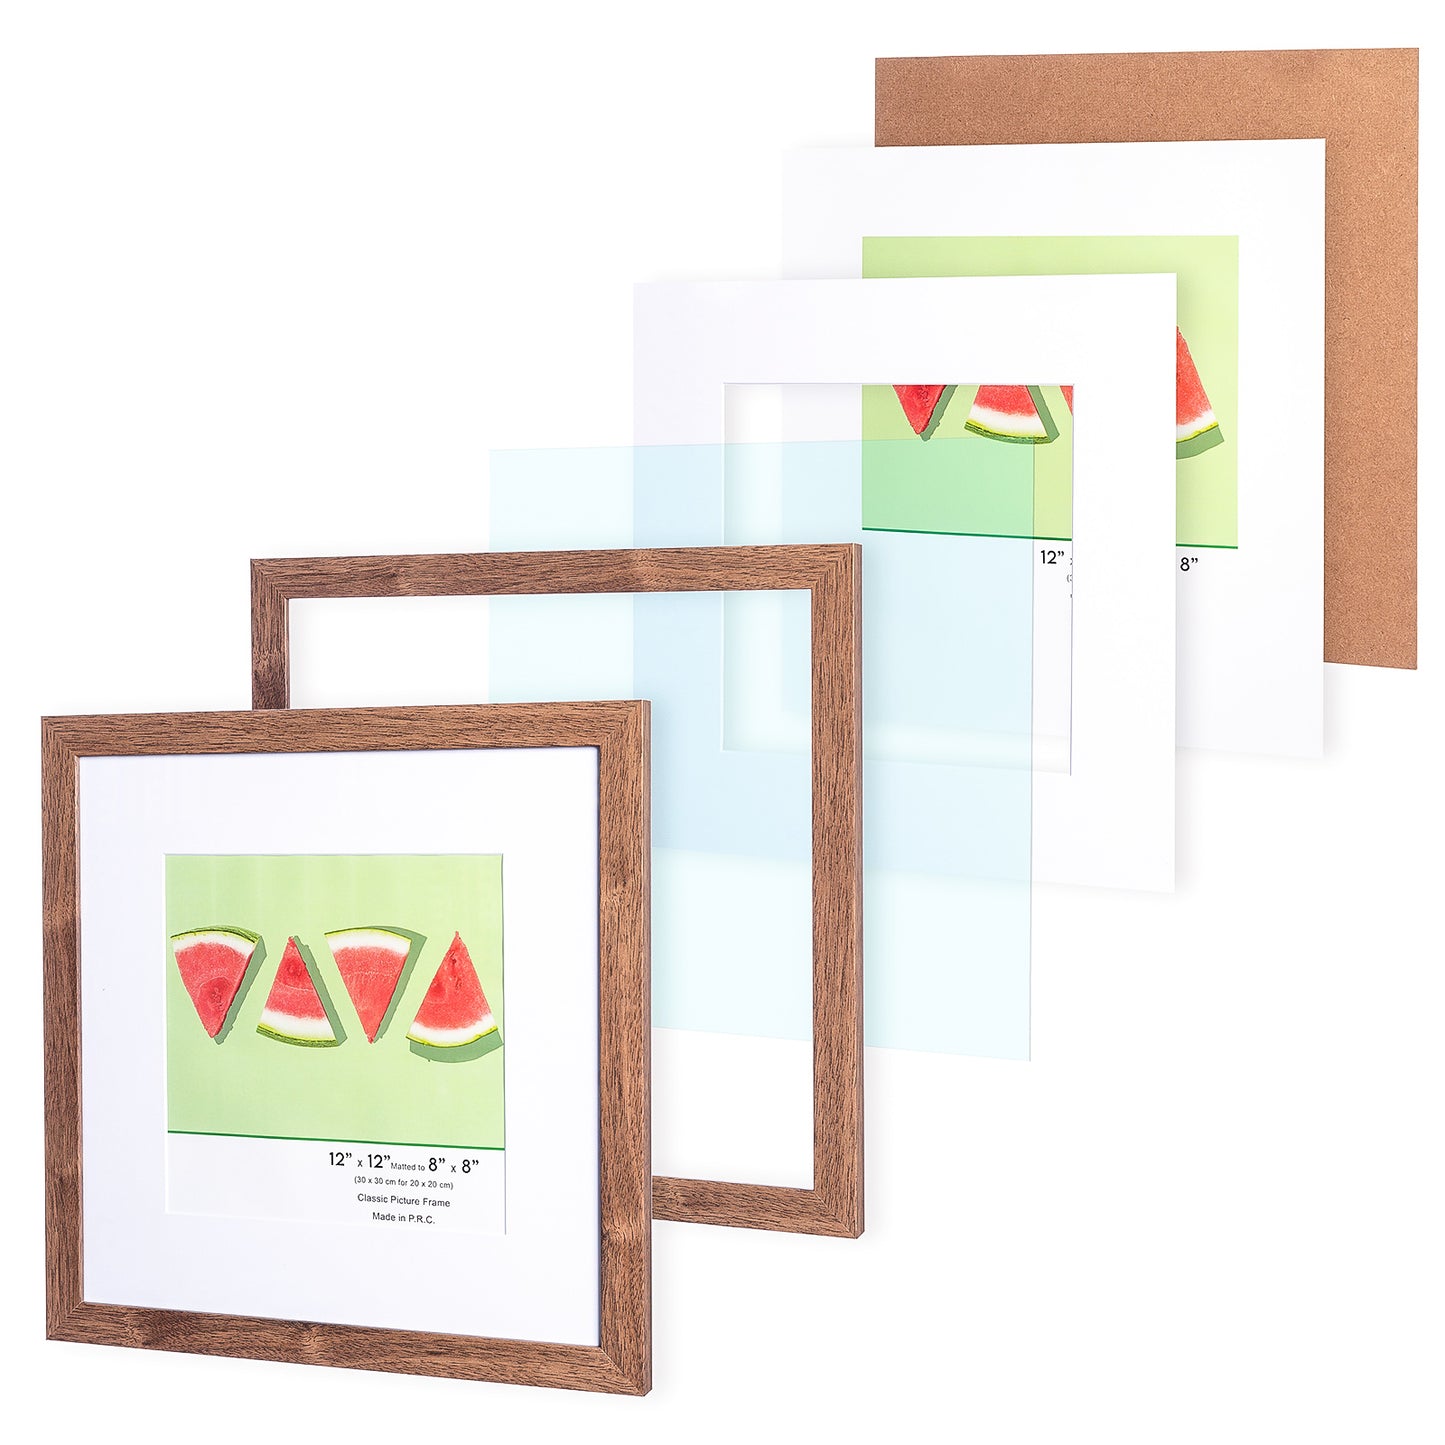 12" x 12” Classic Dark Oak MDF Wood Picture Frame with Tempered Glass, 8" x 8" Matted